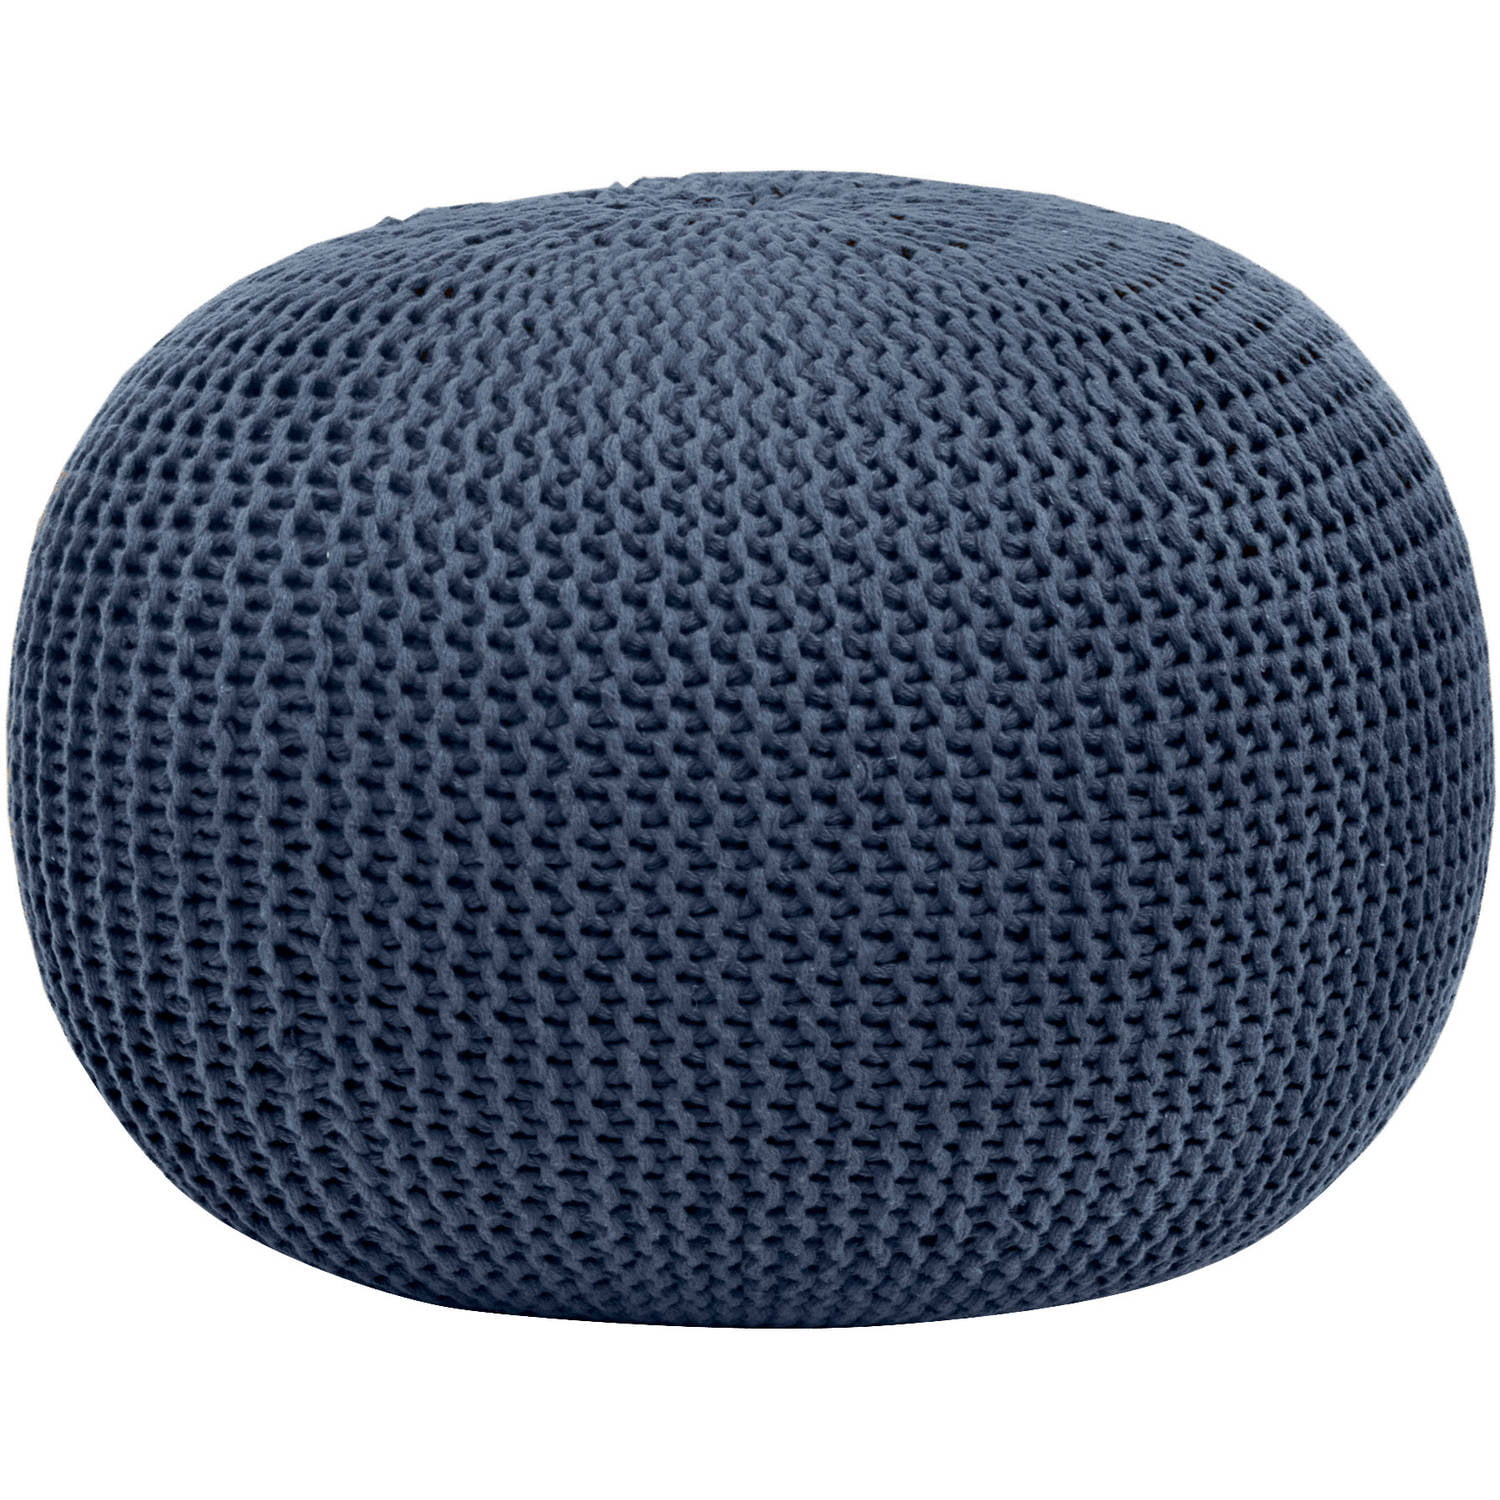 Urban Shop Round Knit Pouf Stool Poof Floor Cover Decor Seat Furniture ...